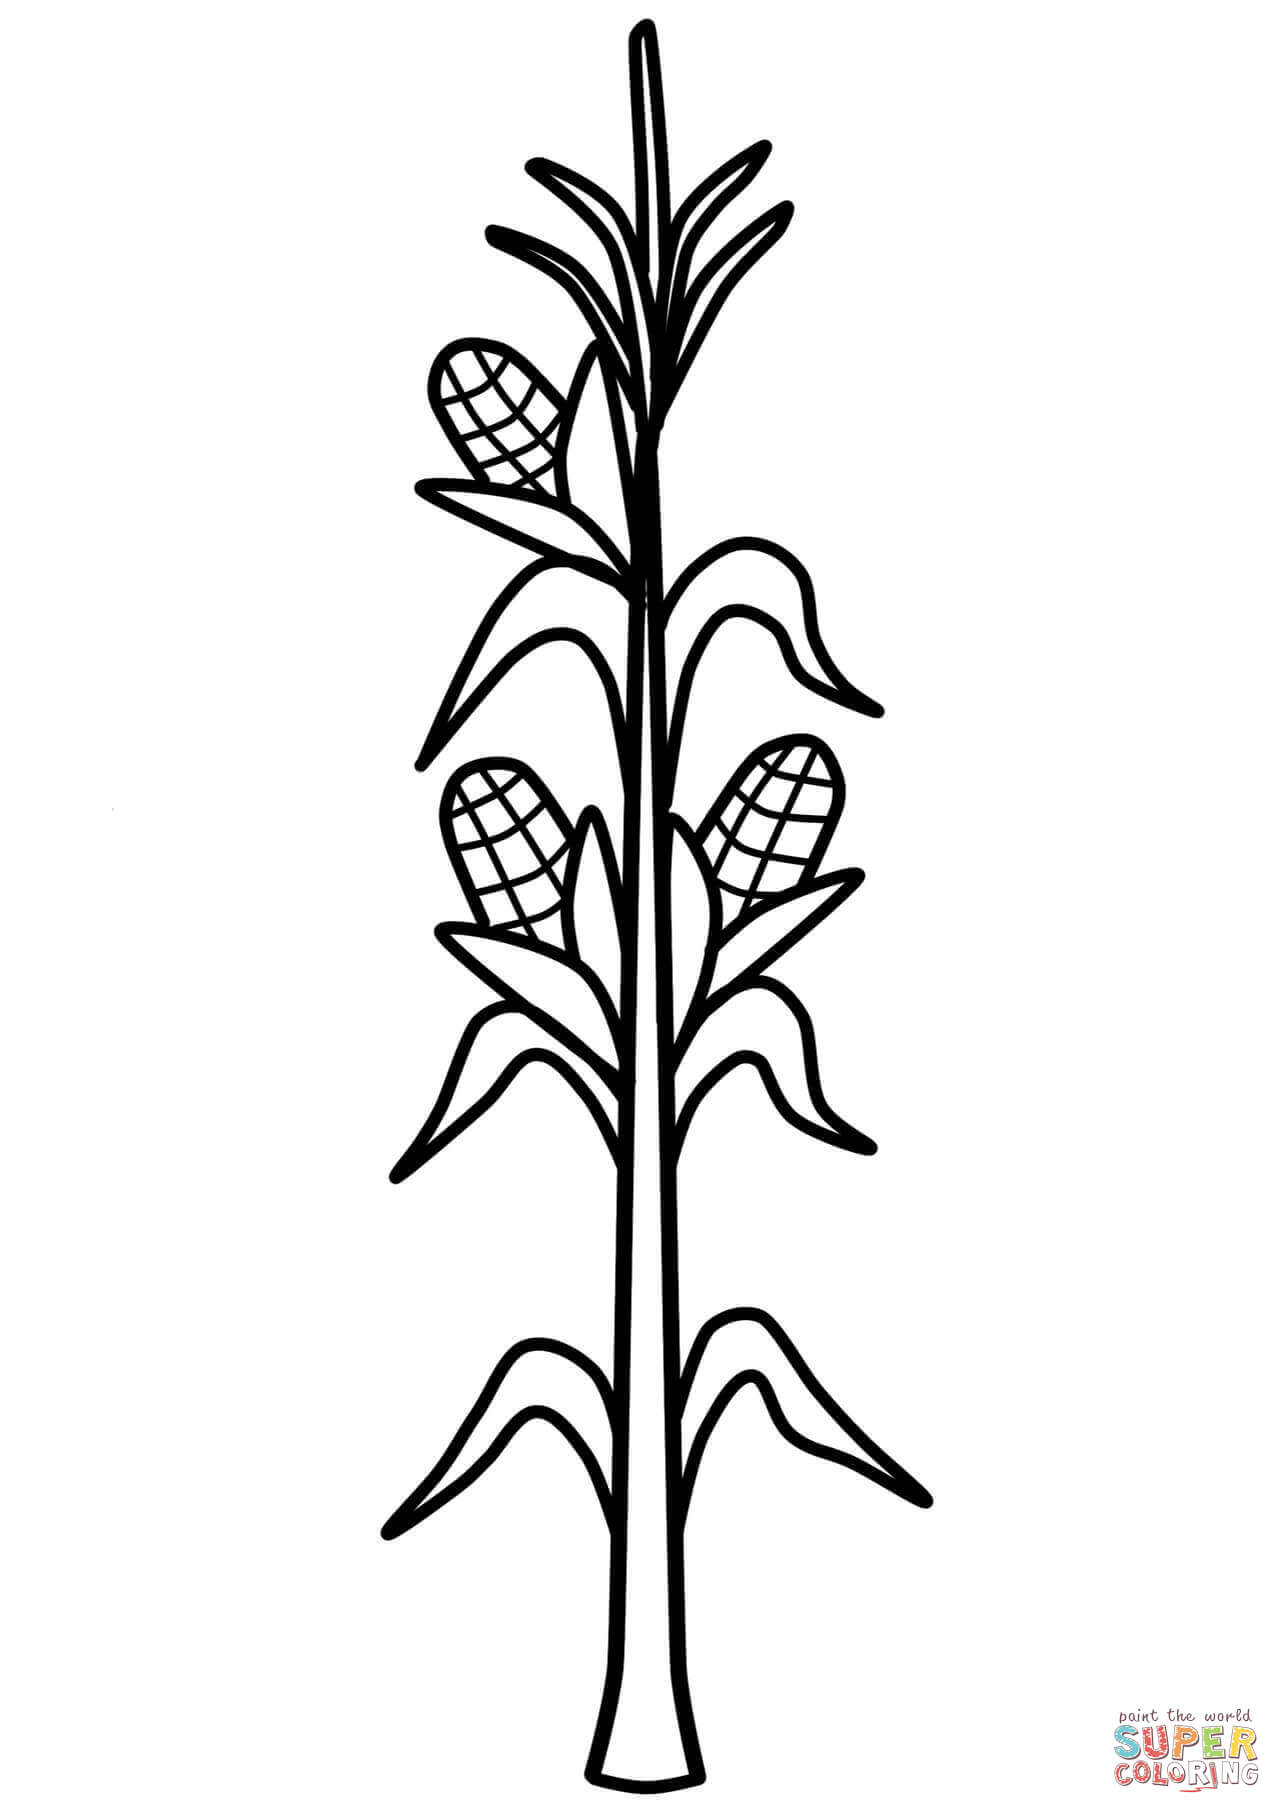 Corn Stalk coloring page | Free Printable Coloring Pages